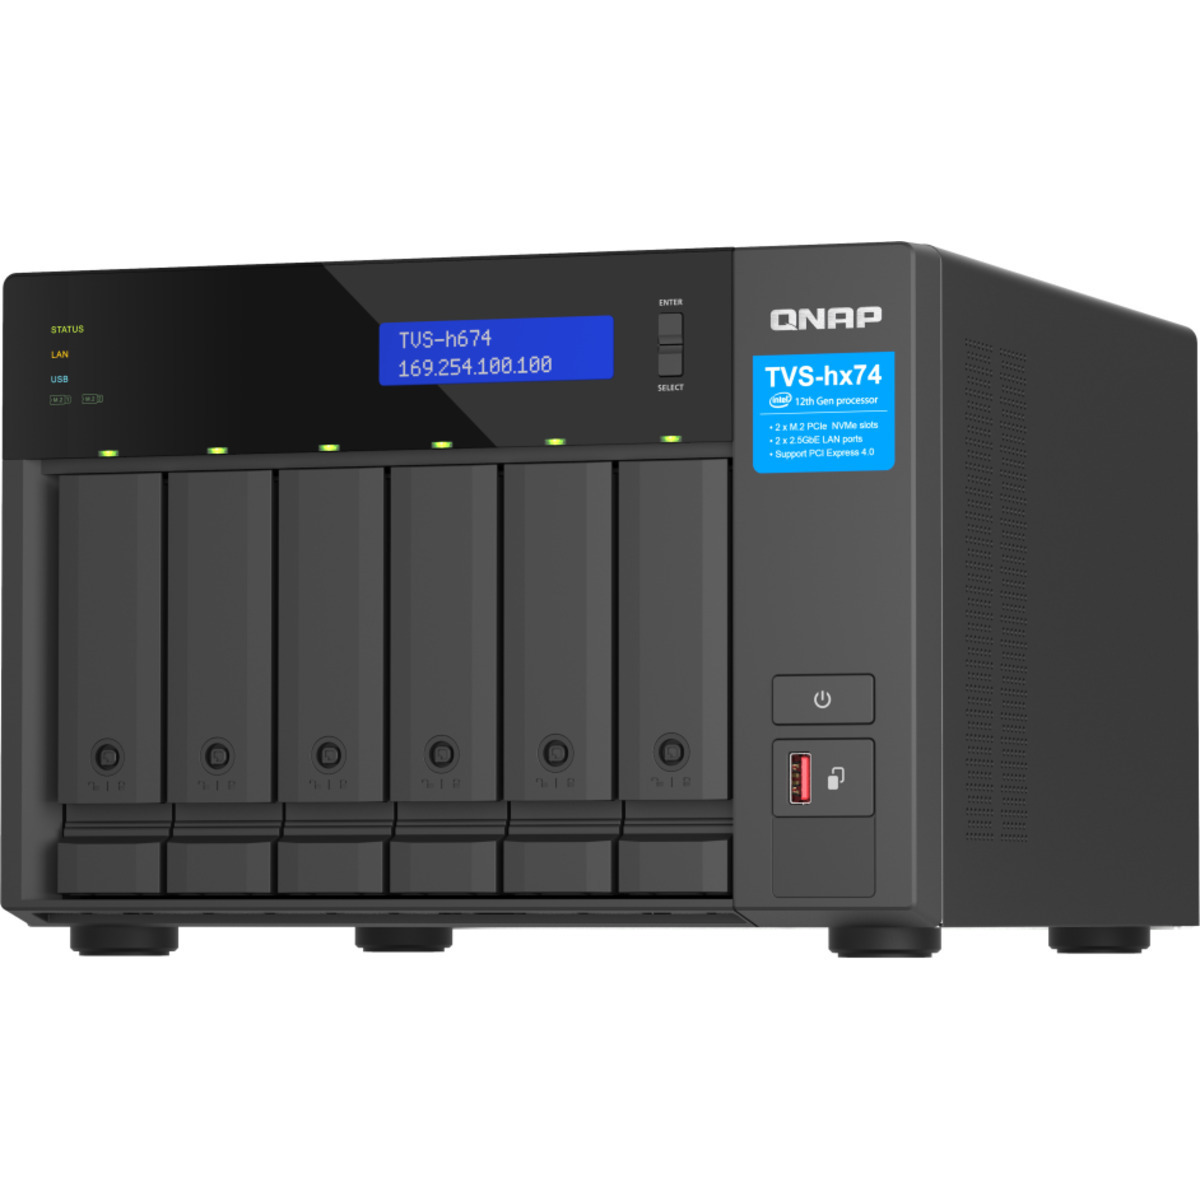 buy QNAP TVS-h674 Core i5 132tb Desktop NAS - Network Attached Storage Device 6x22000gb Western Digital Ultrastar HC570 WUH722222ALE6L4 3.5 7200rpm SATA 6Gb/s HDD ENTERPRISE Class Drives Installed - Burn-In Tested - nas headquarters buy network attached storage server device das new raid-5 free shipping simply usa TVS-h674 Core i5